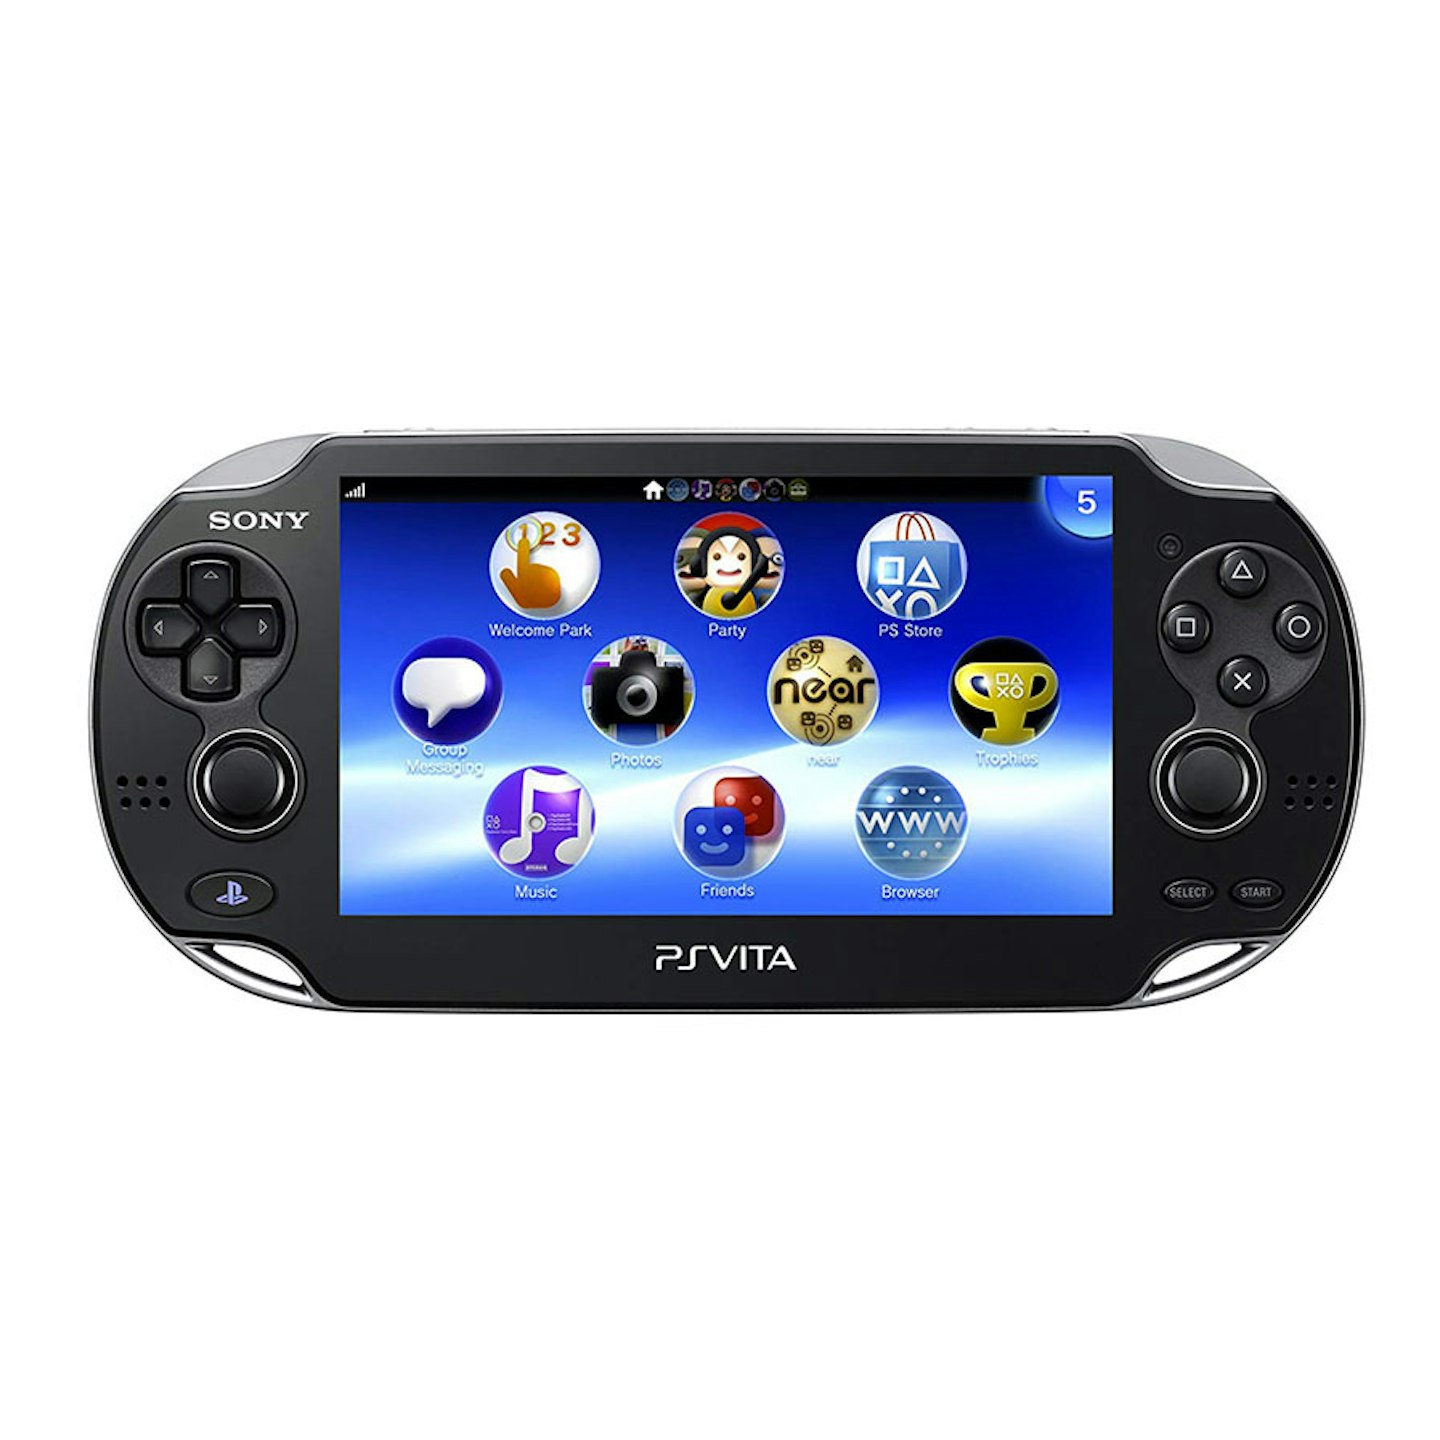 PlayStation Vita, second-hand from £150